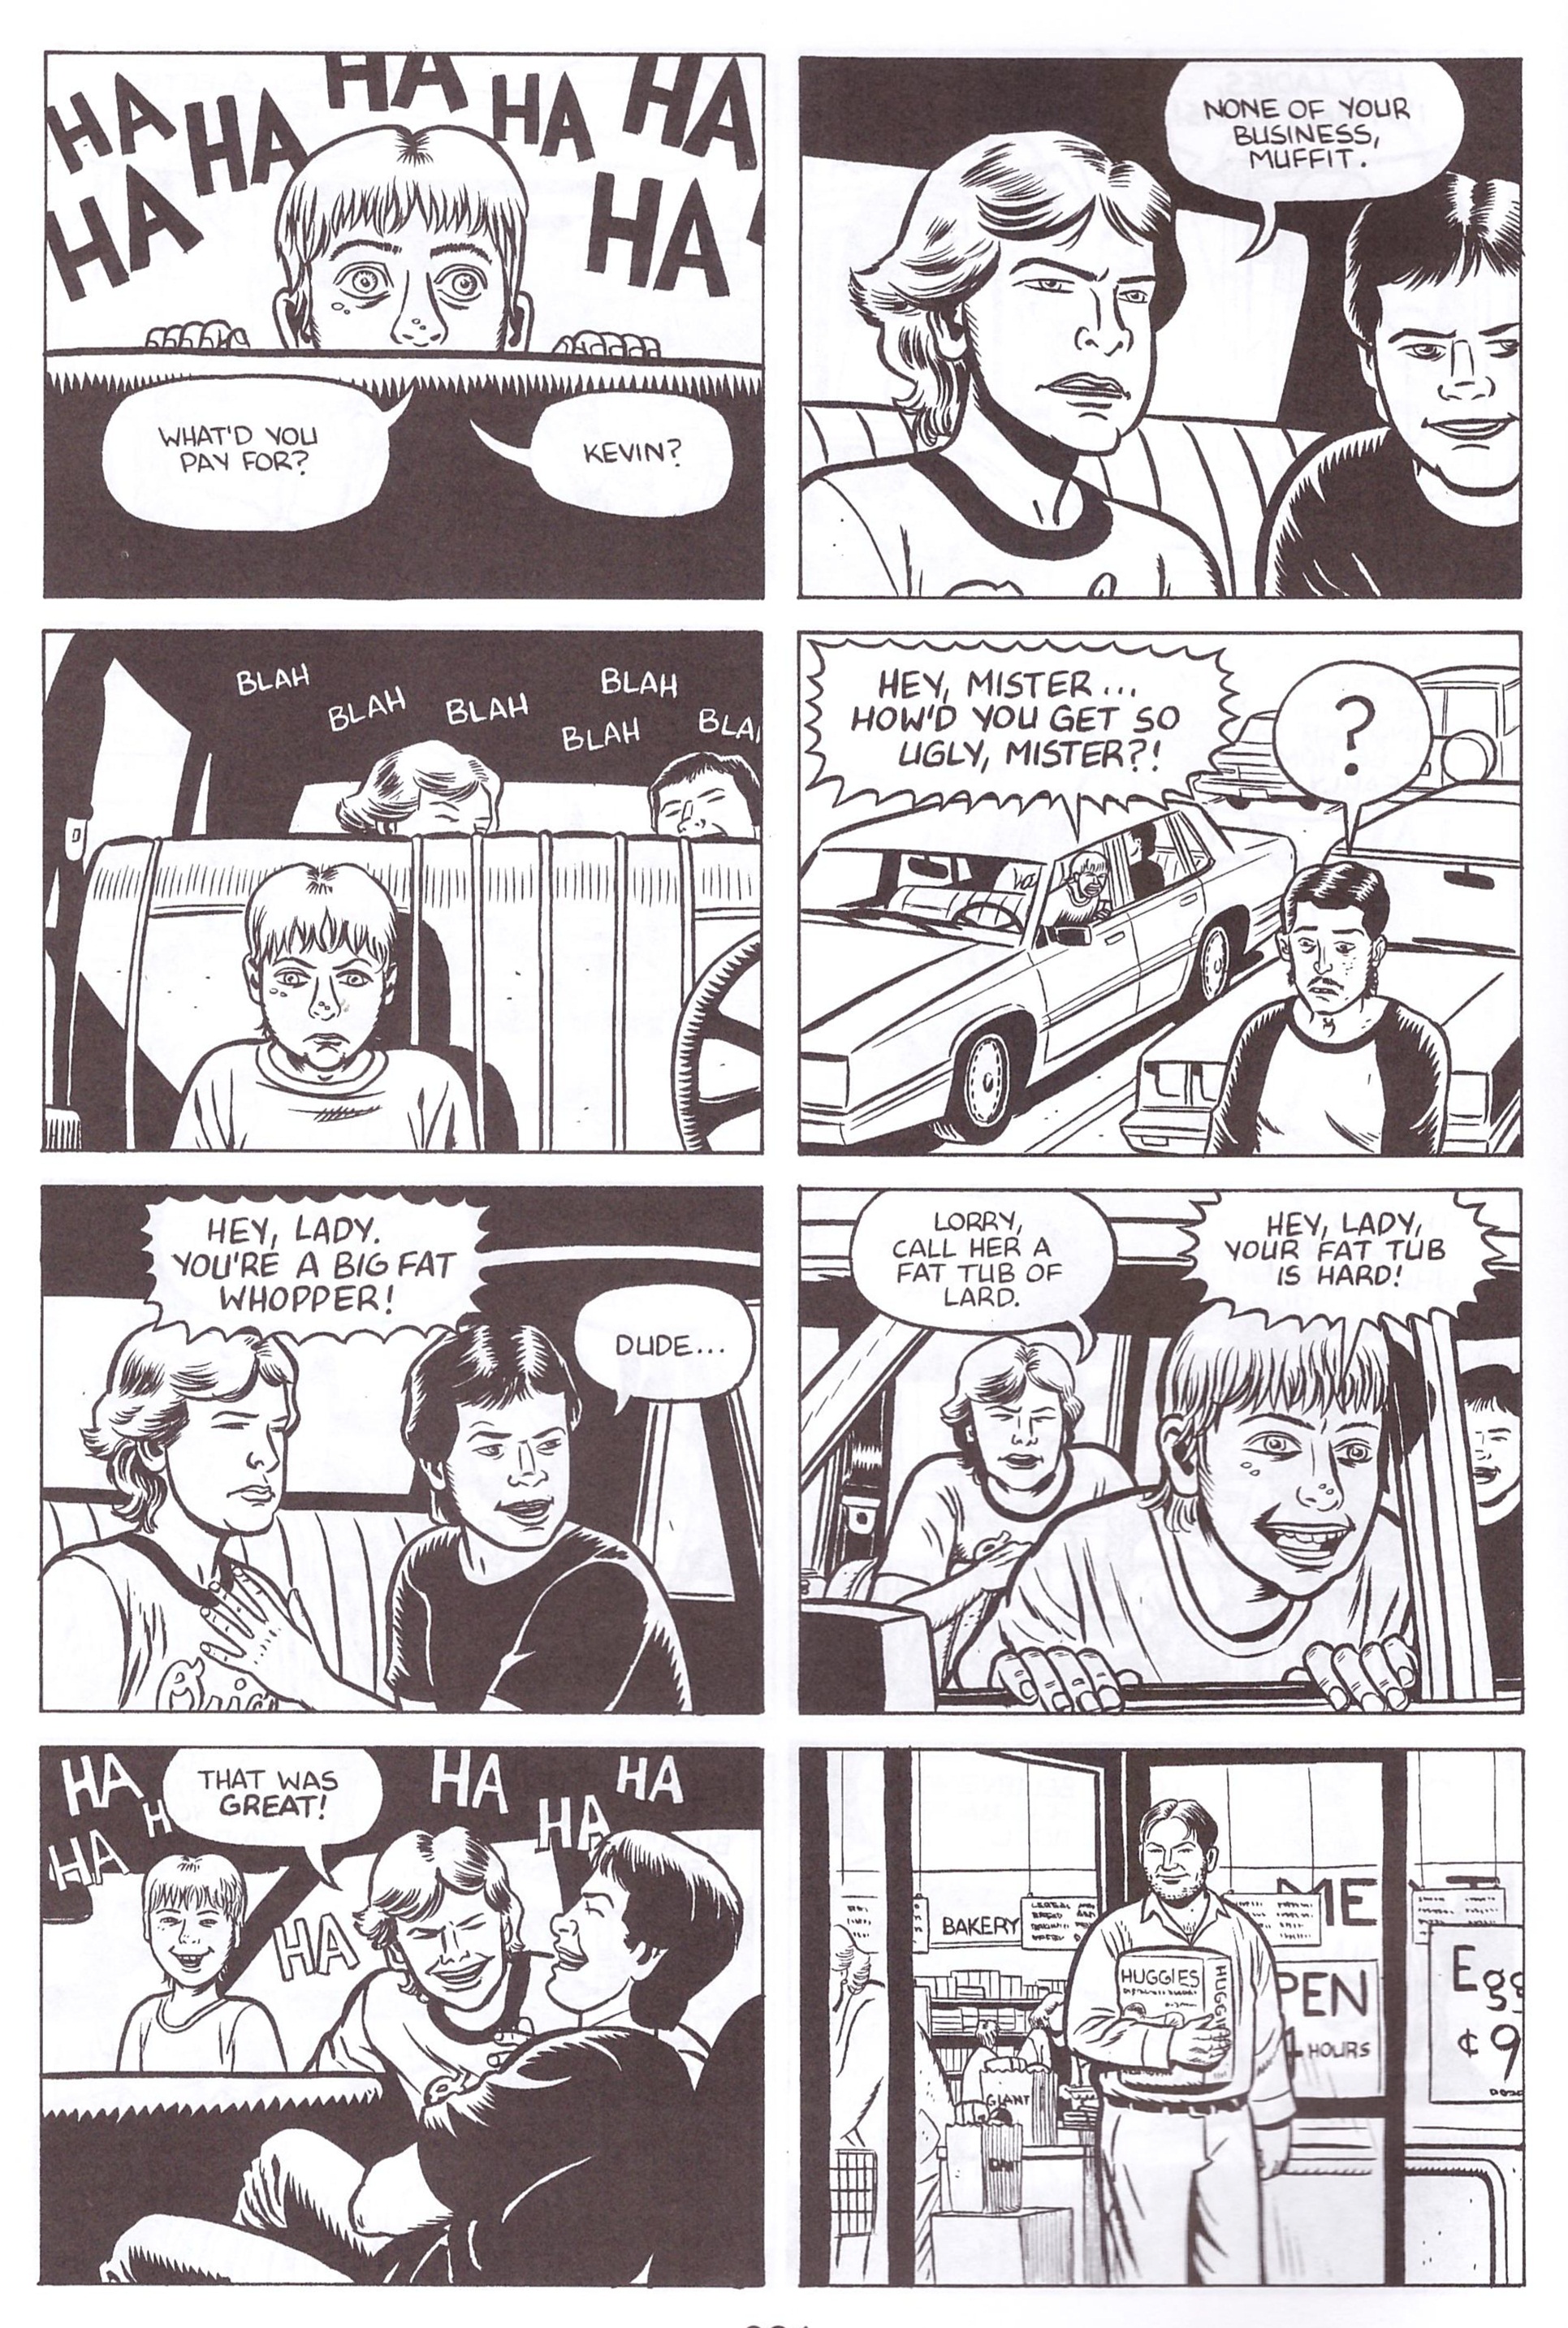 Stray Bullets Hi-Jinks and Derring-Do review